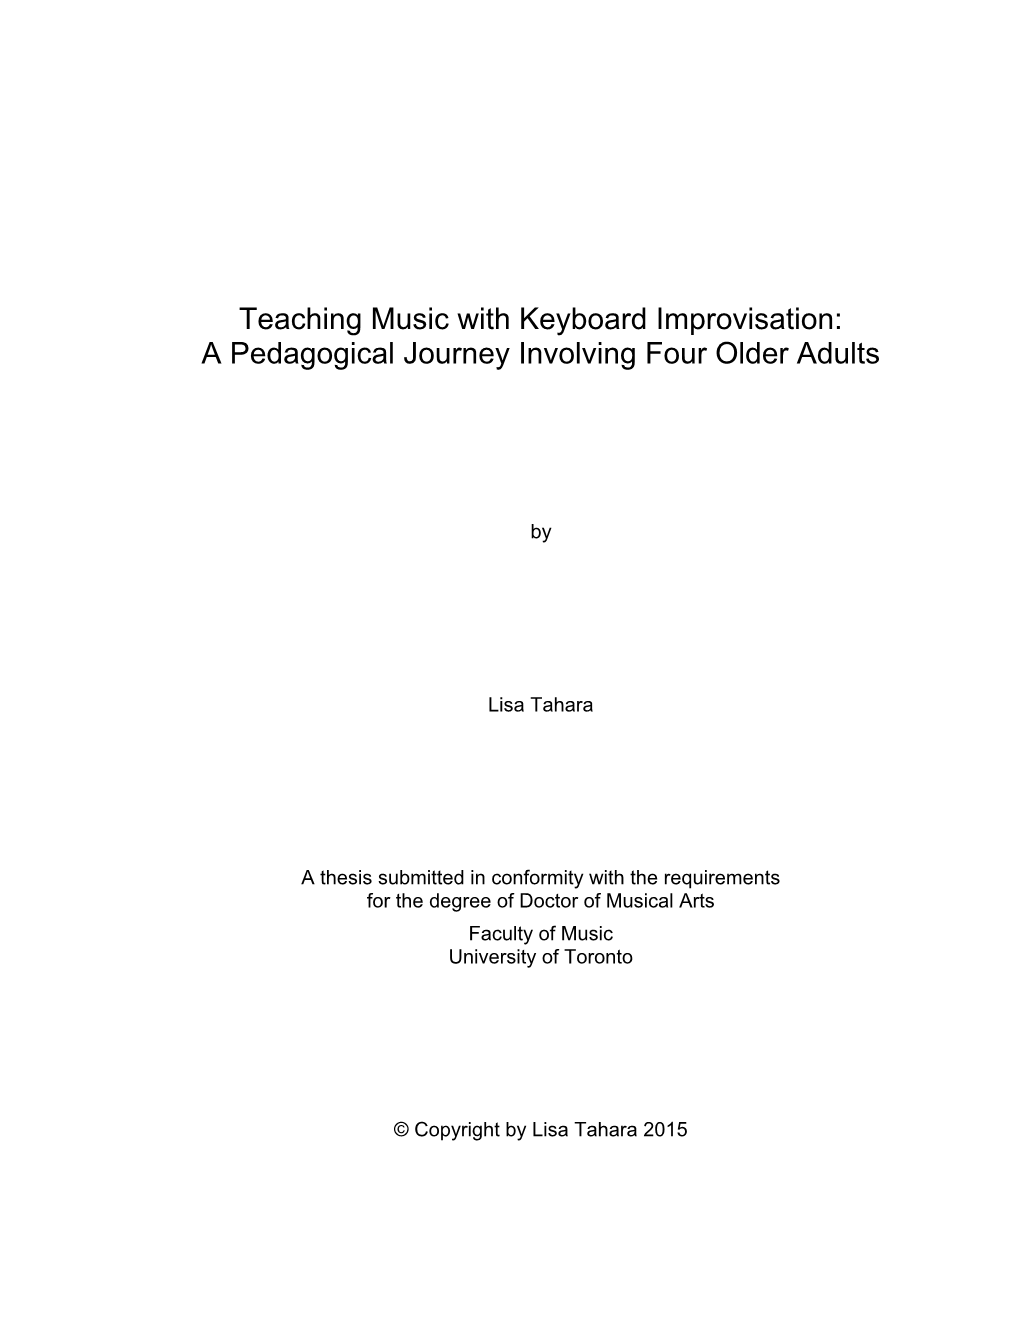 Teaching Music with Keyboard Improvisation: a Pedagogical Journey Involving Four Older Adults